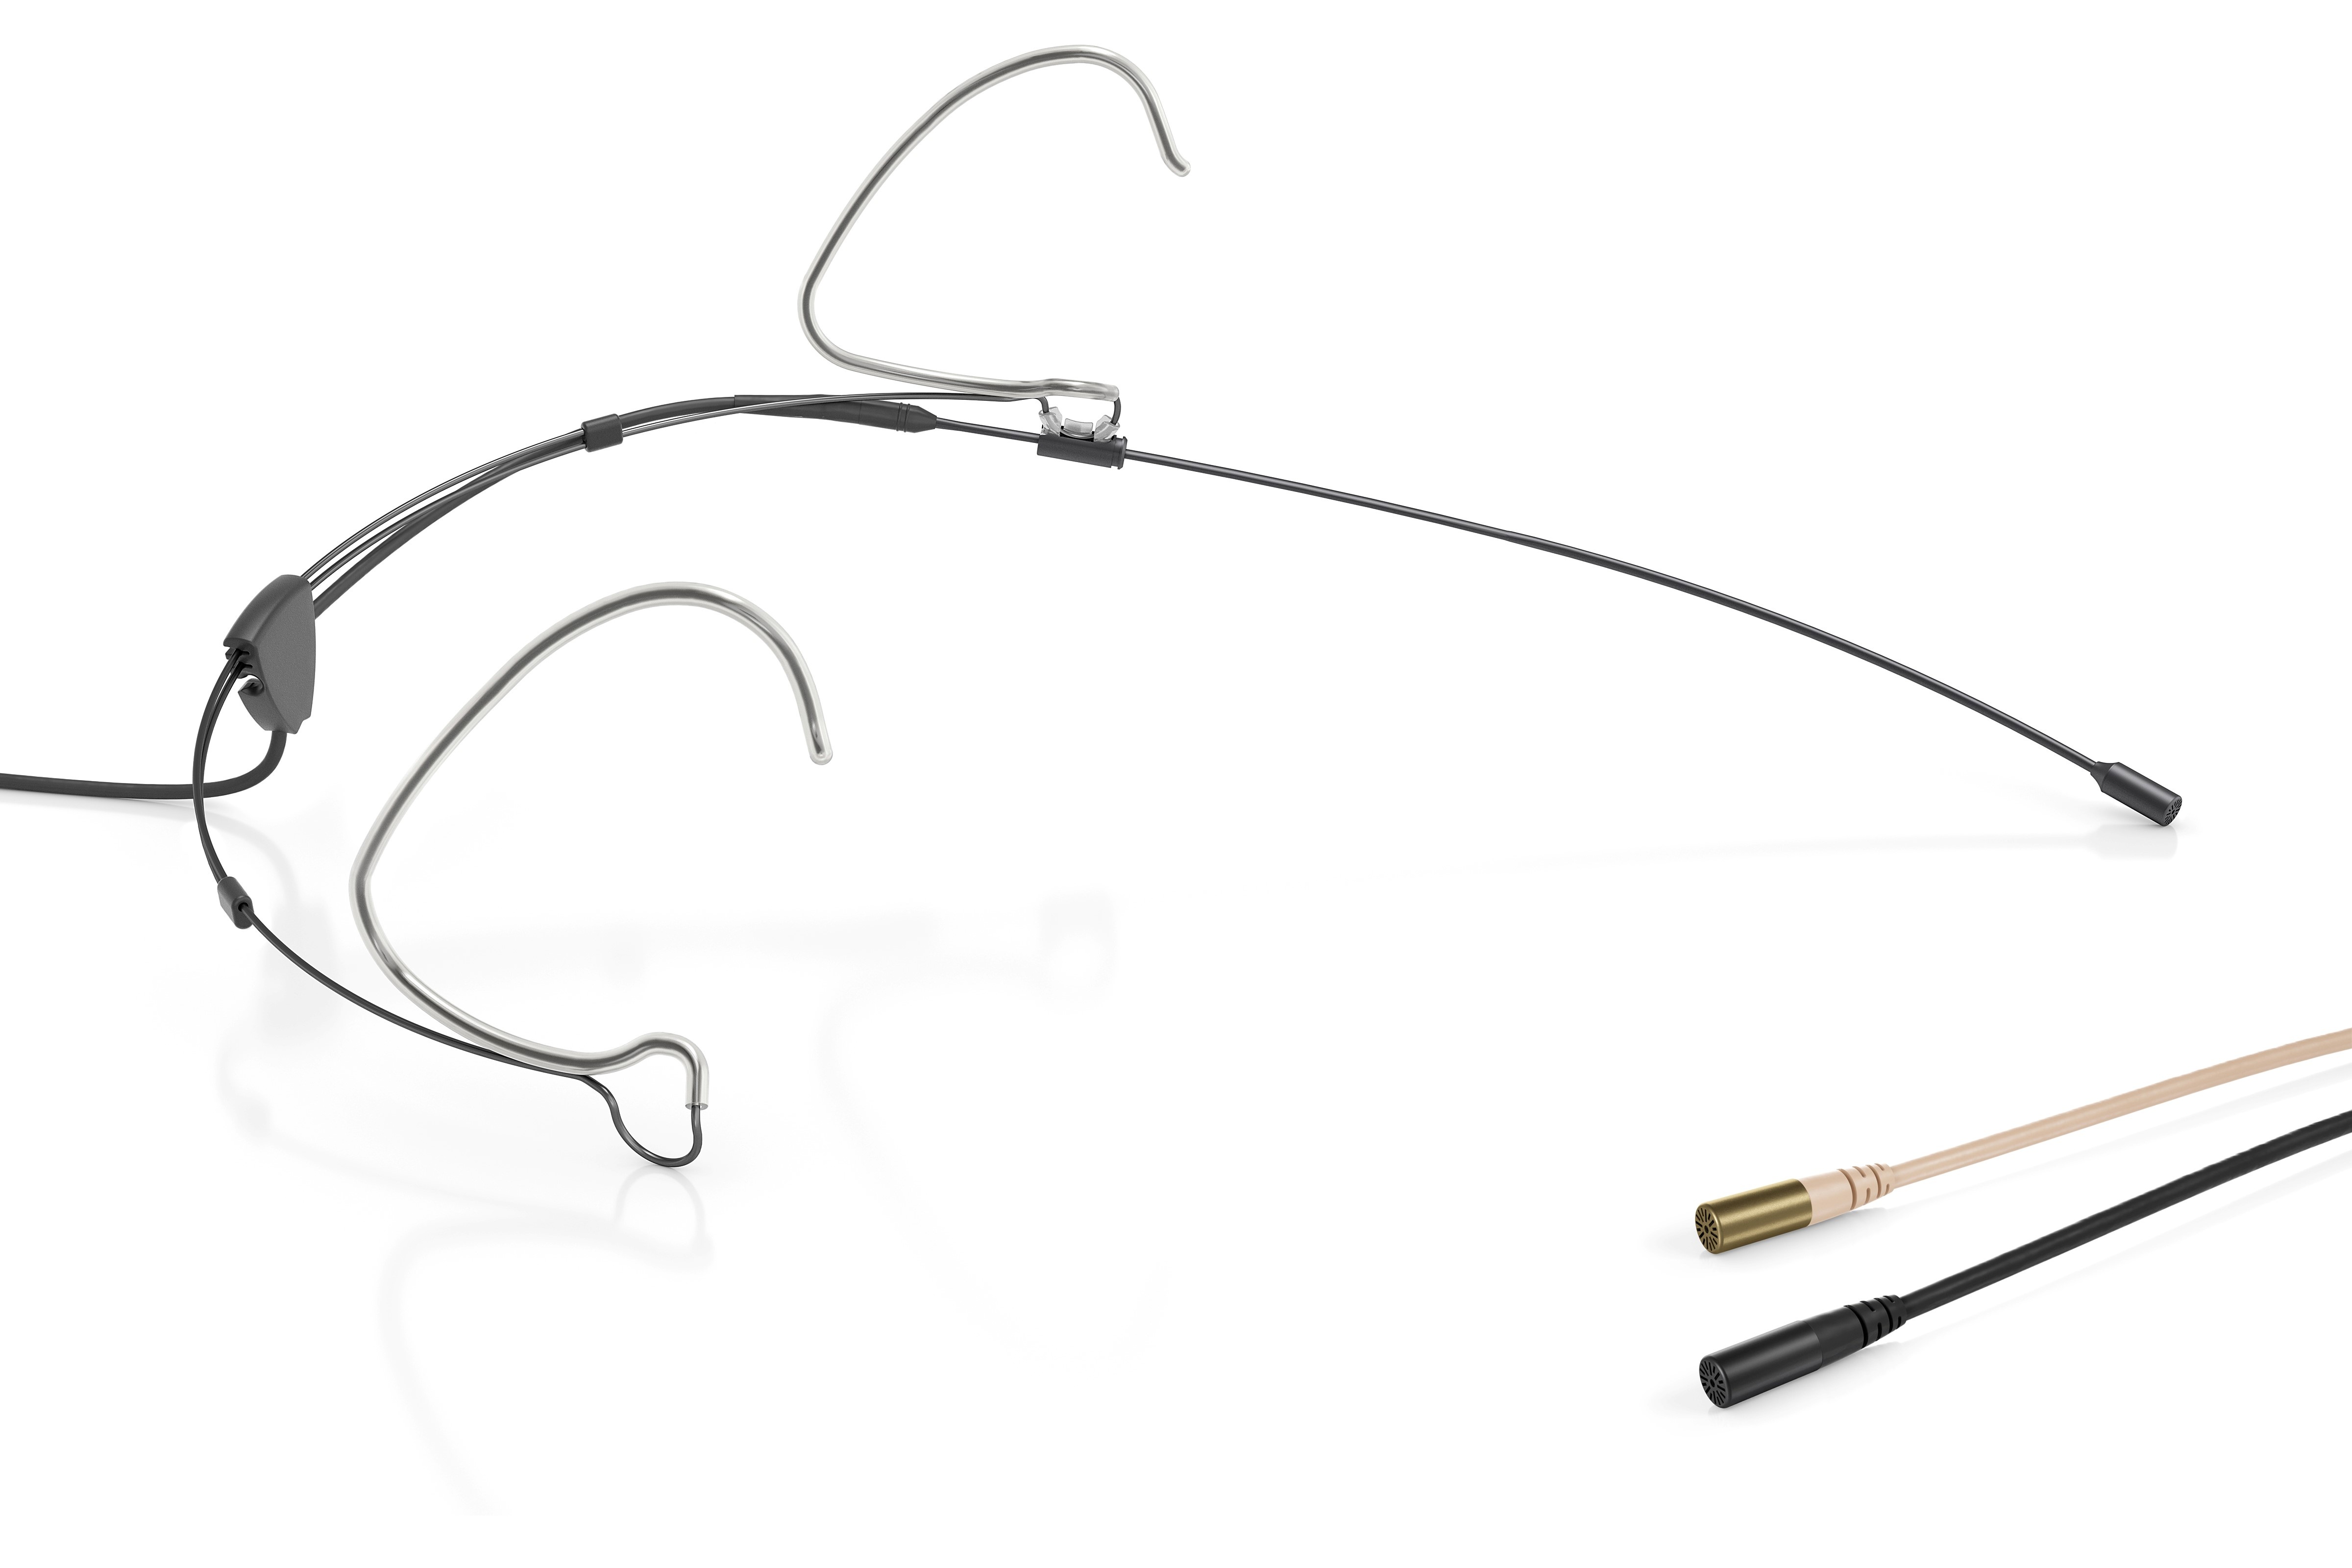 6066-subminiature-headset-with- 6060-lavaliers.jpg